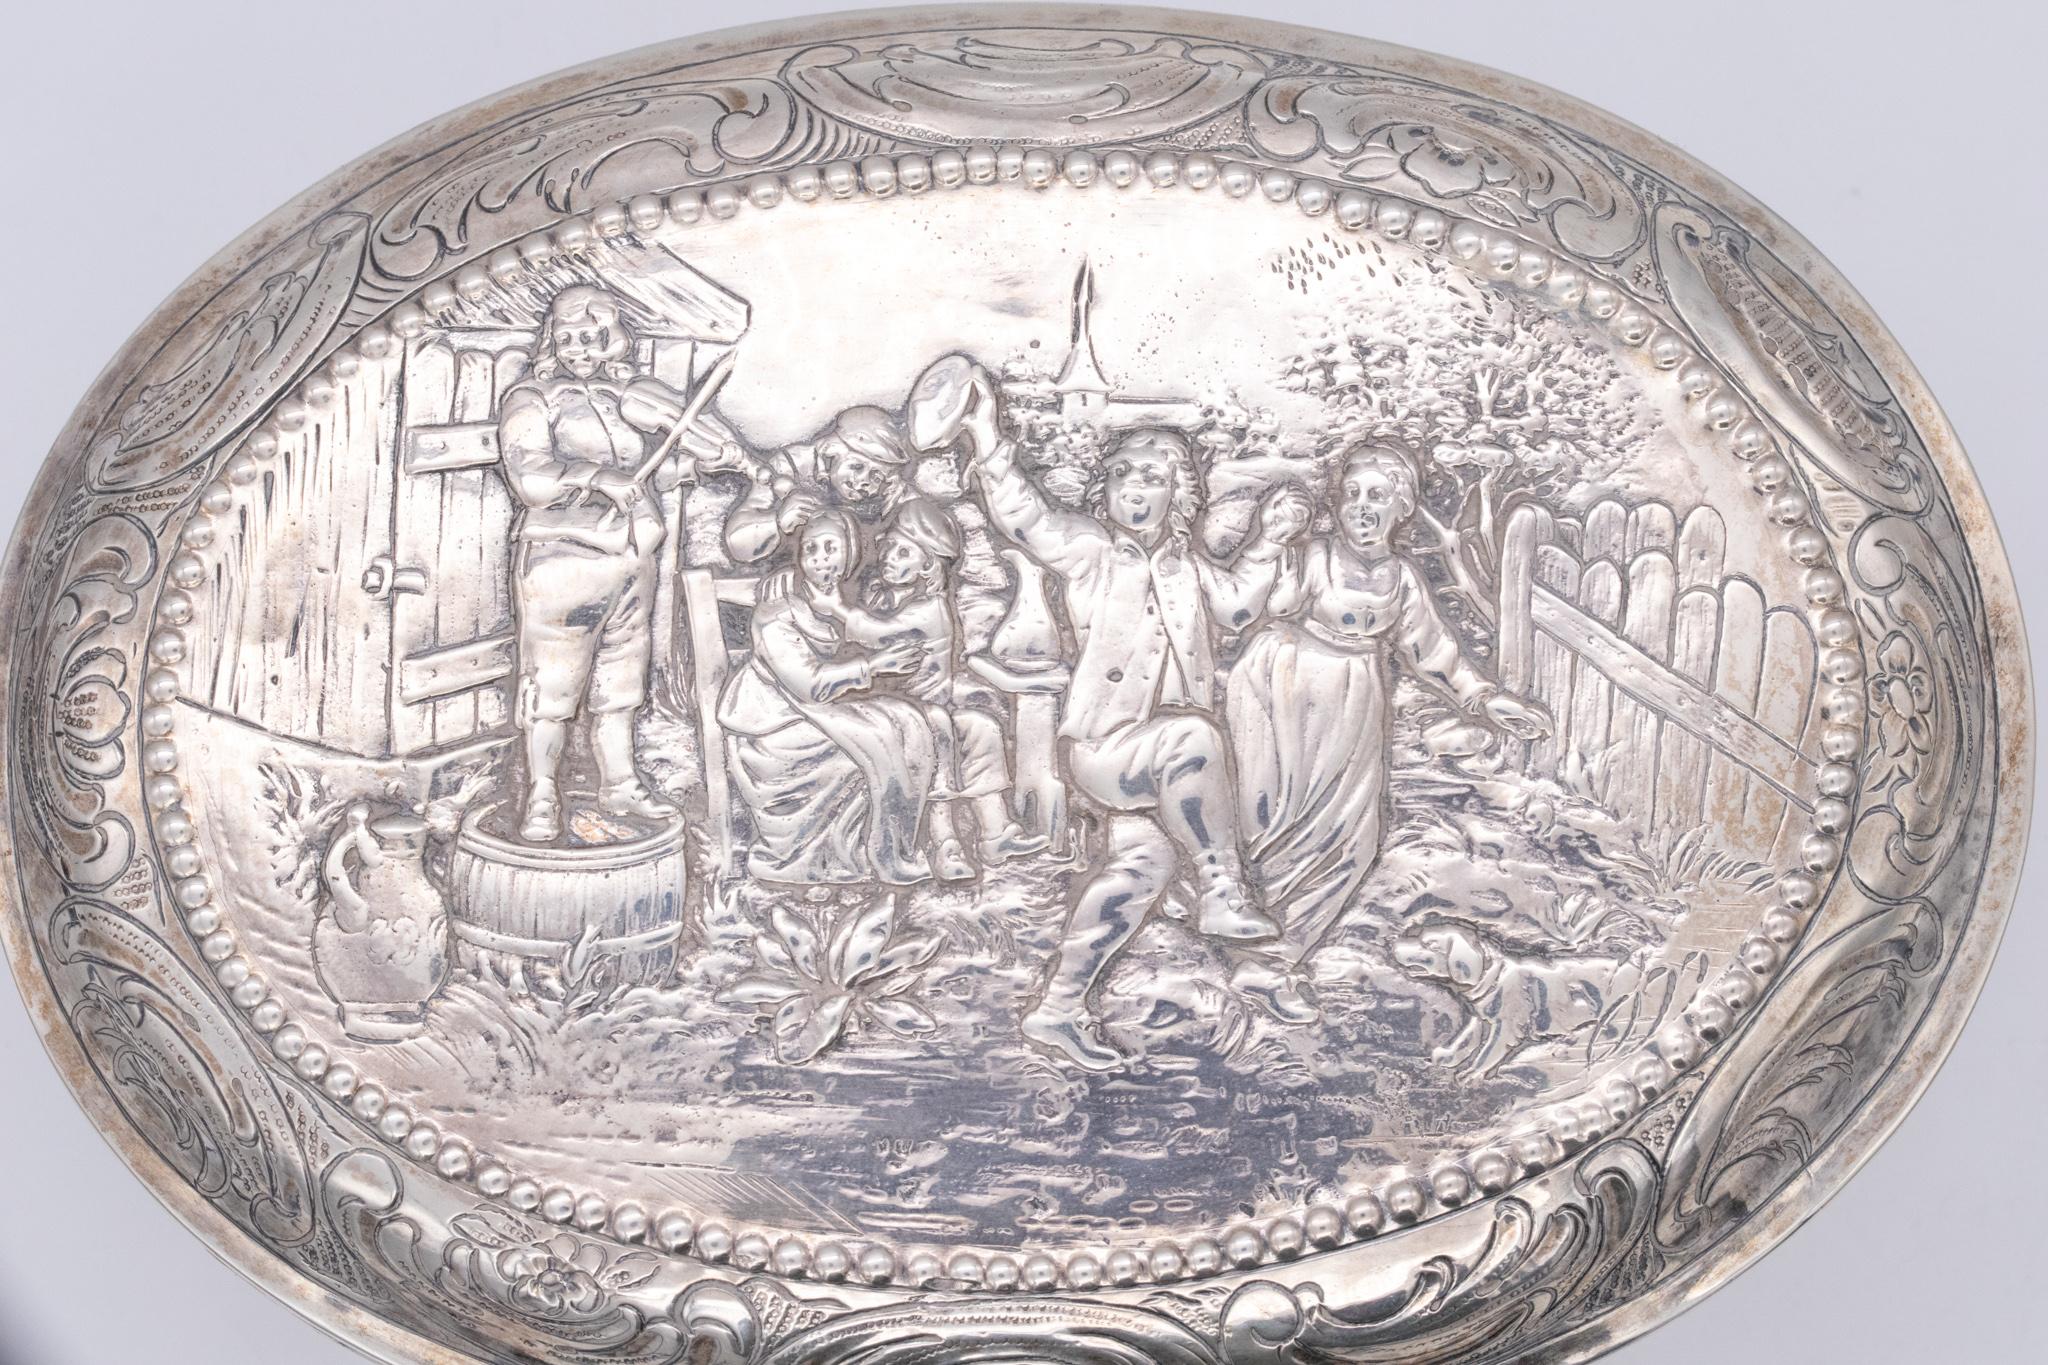 Dutch Netherlands 1872 Antique Oval Repousse Trinket Box in .875 Sterling Silver For Sale 1